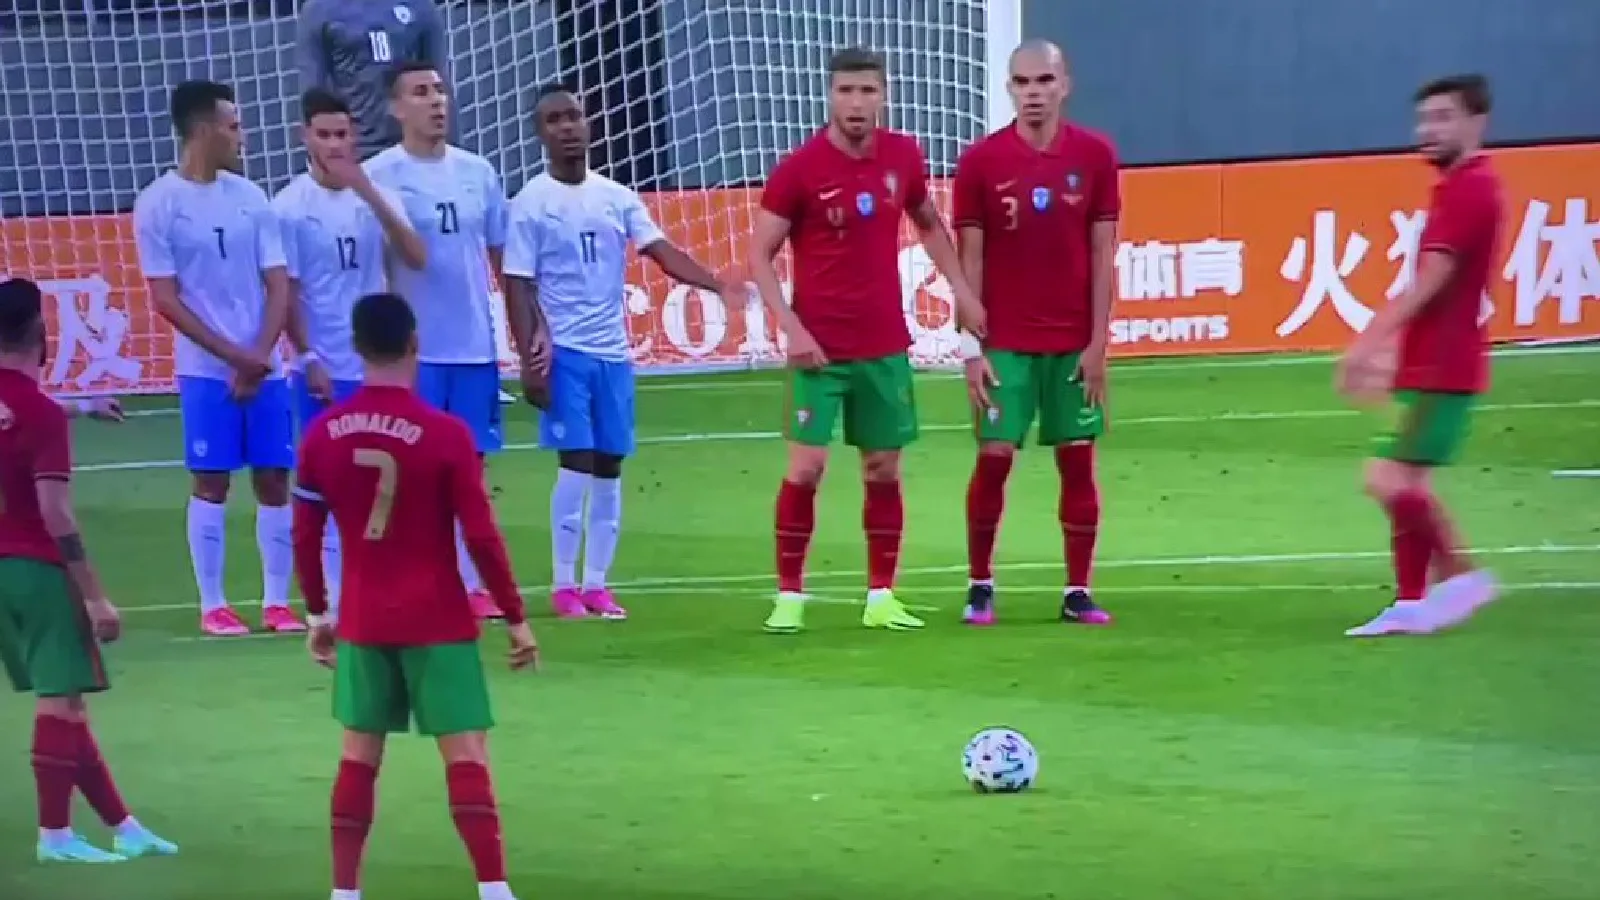 Cristiano Ronaldo taking his famous stance before skying his free-kick against Israel